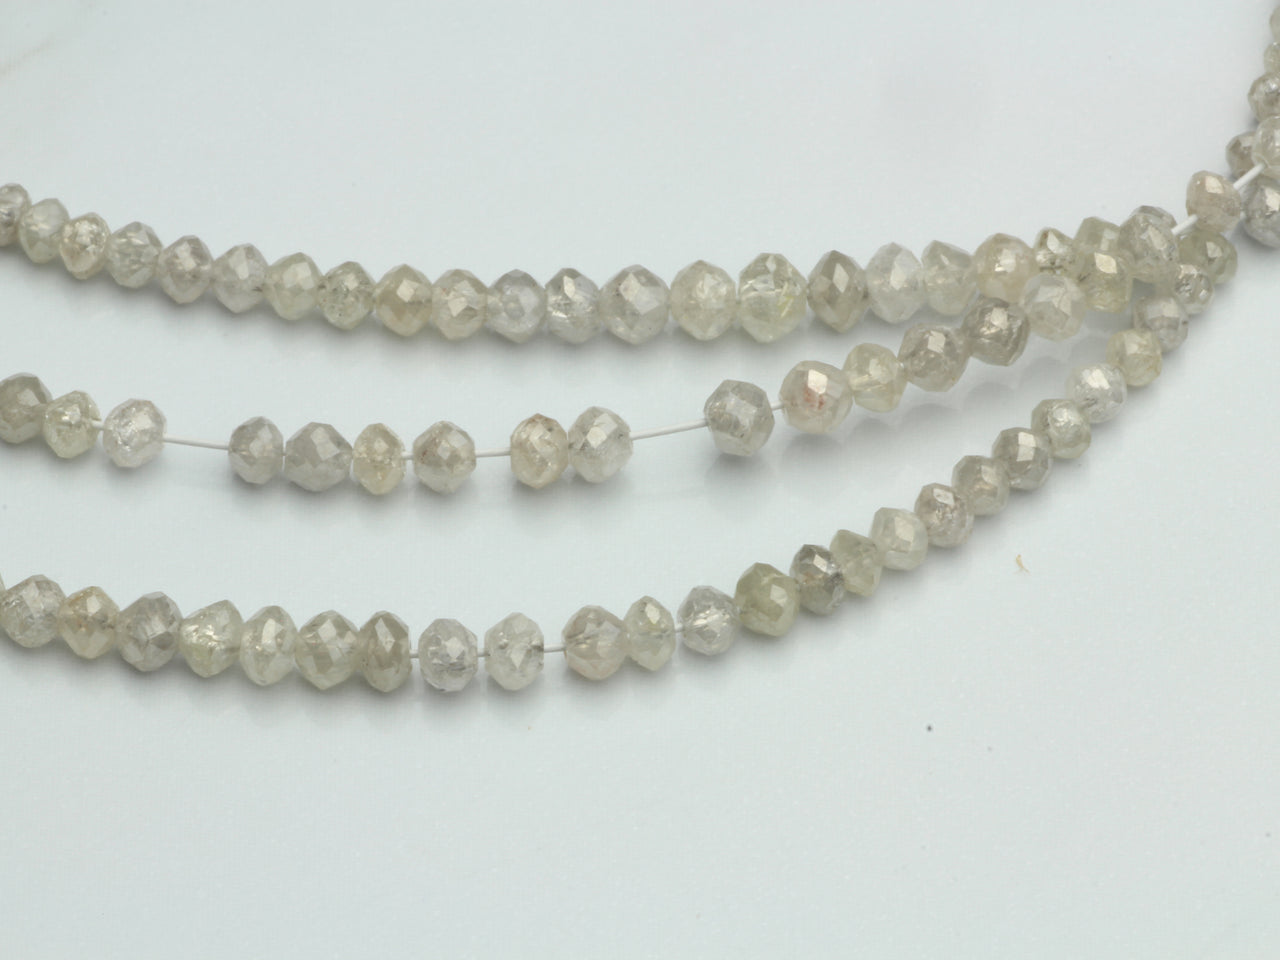 Gray Diamond 1.8mm Faceted Rondelles